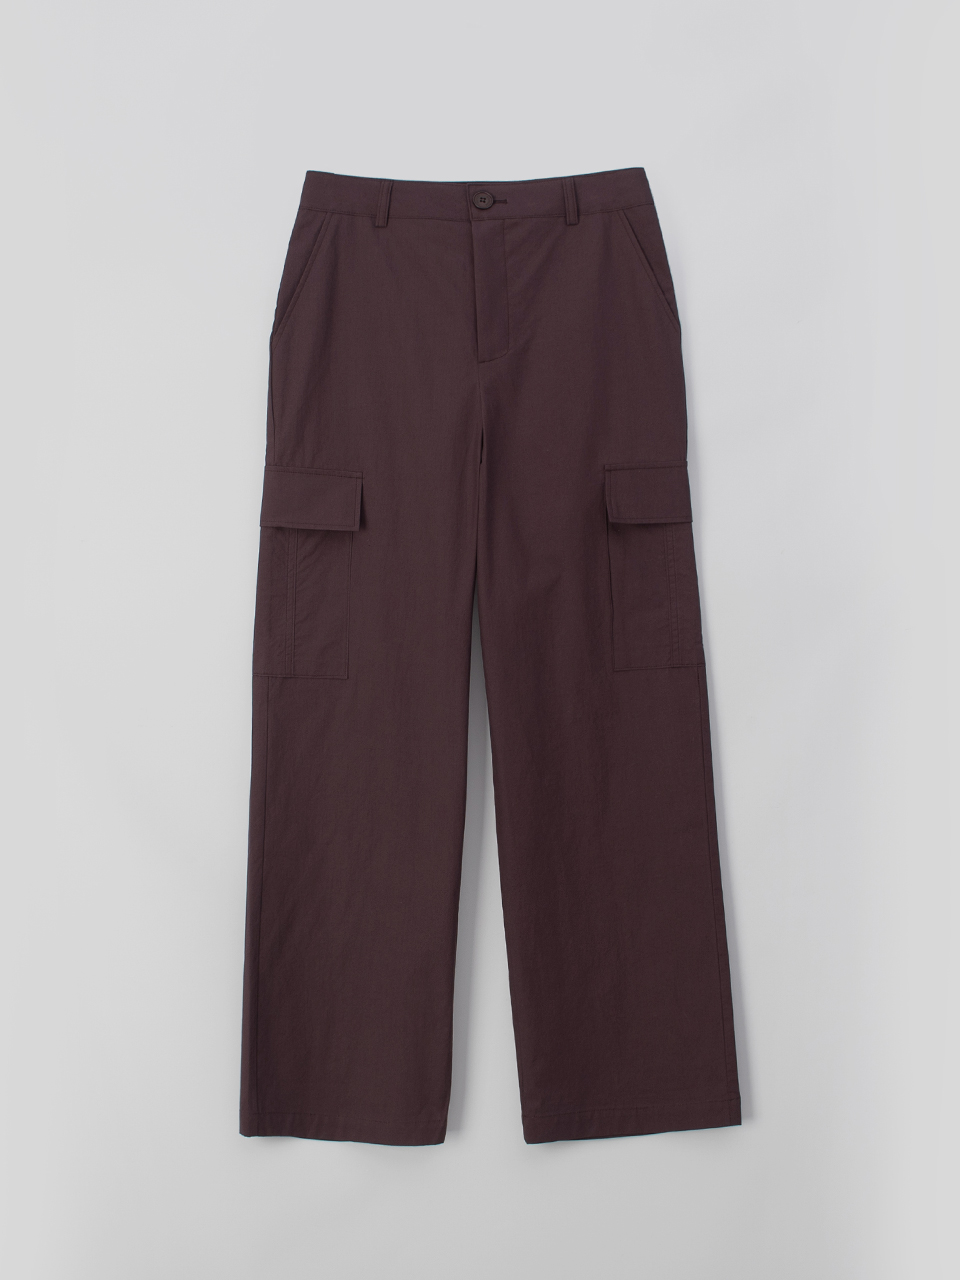 2nd 6/7 순차발송_forest cargo wide pants - wineBRENDA BRENDEN